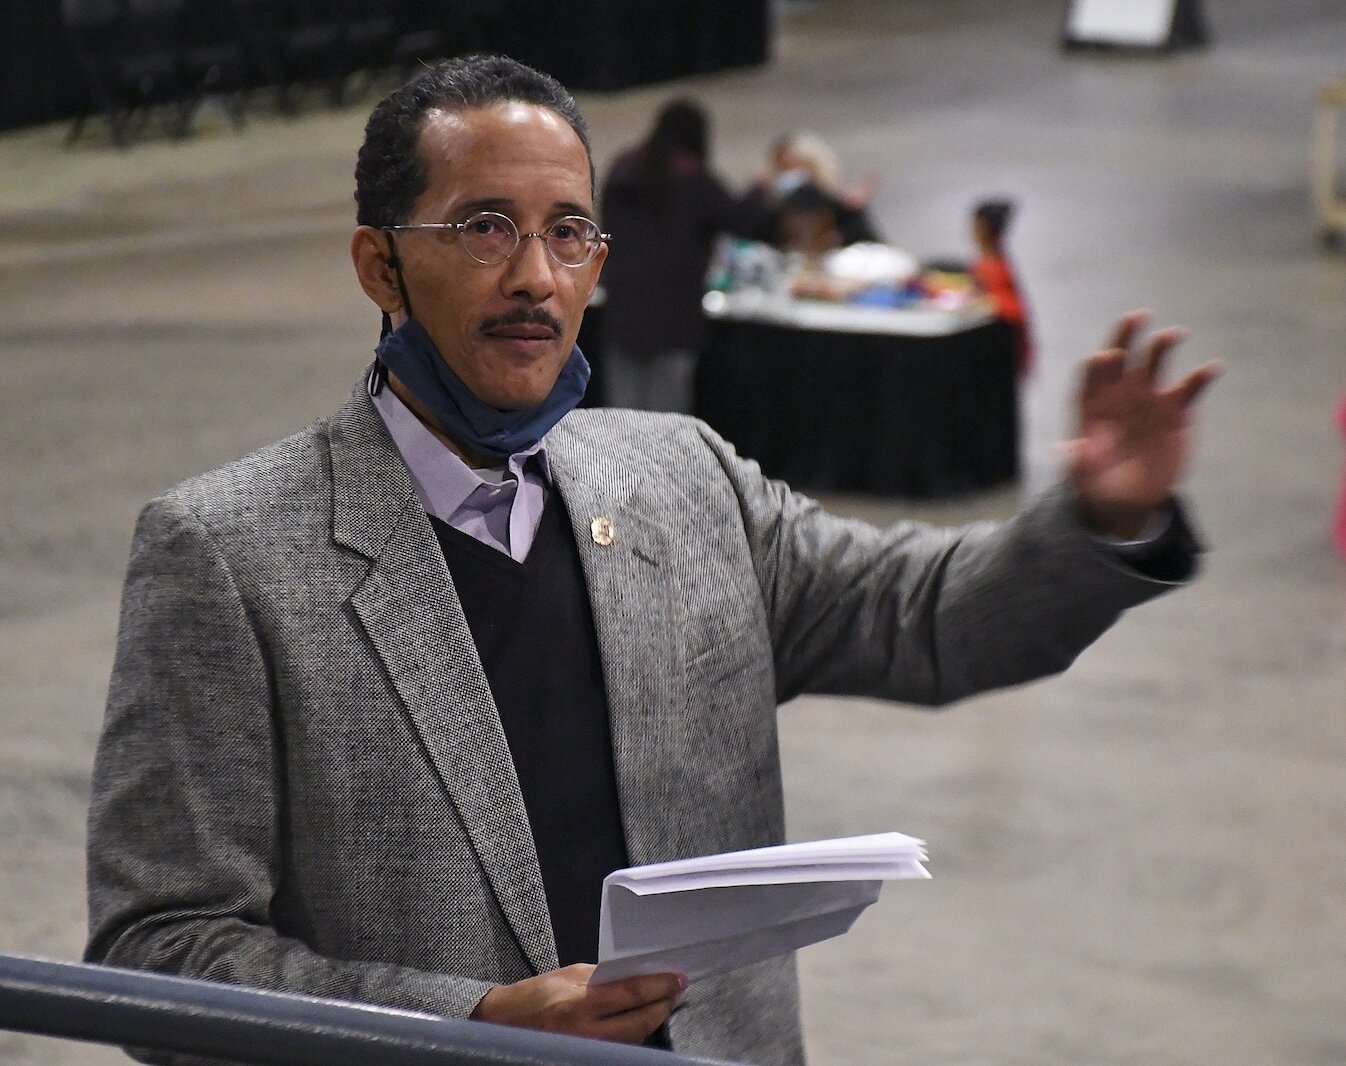 J.R. Reynolds facilitates a session of racial equity at Monday’s “We, Us, Our: 55 Shades of Black” commemoration of Martin Luther King, Jr’s birthday sponsored by the Southwestern Michigan Urban League at Kellogg Arena.